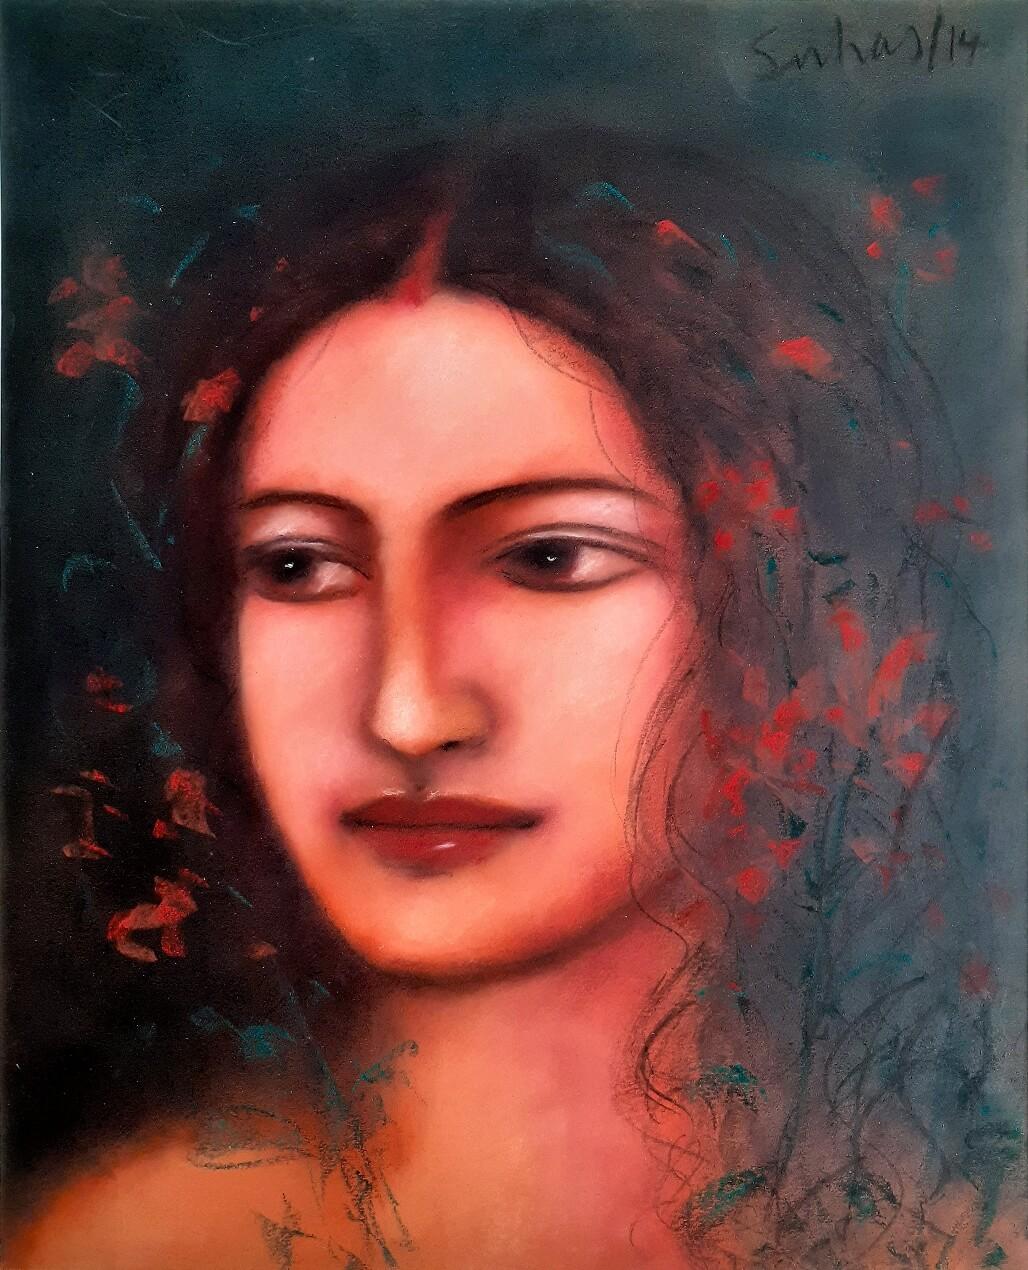 Suhas Roy - Radha - 20 x 16 inches ( unframed size)  
Mixed Media on Paper , 2014

Suhas Roy 's mystic woman which he calls 'Radha', either Oil on canvas or soft colored pastel on Paper or board are a series of work where he sees an ethereal mystic